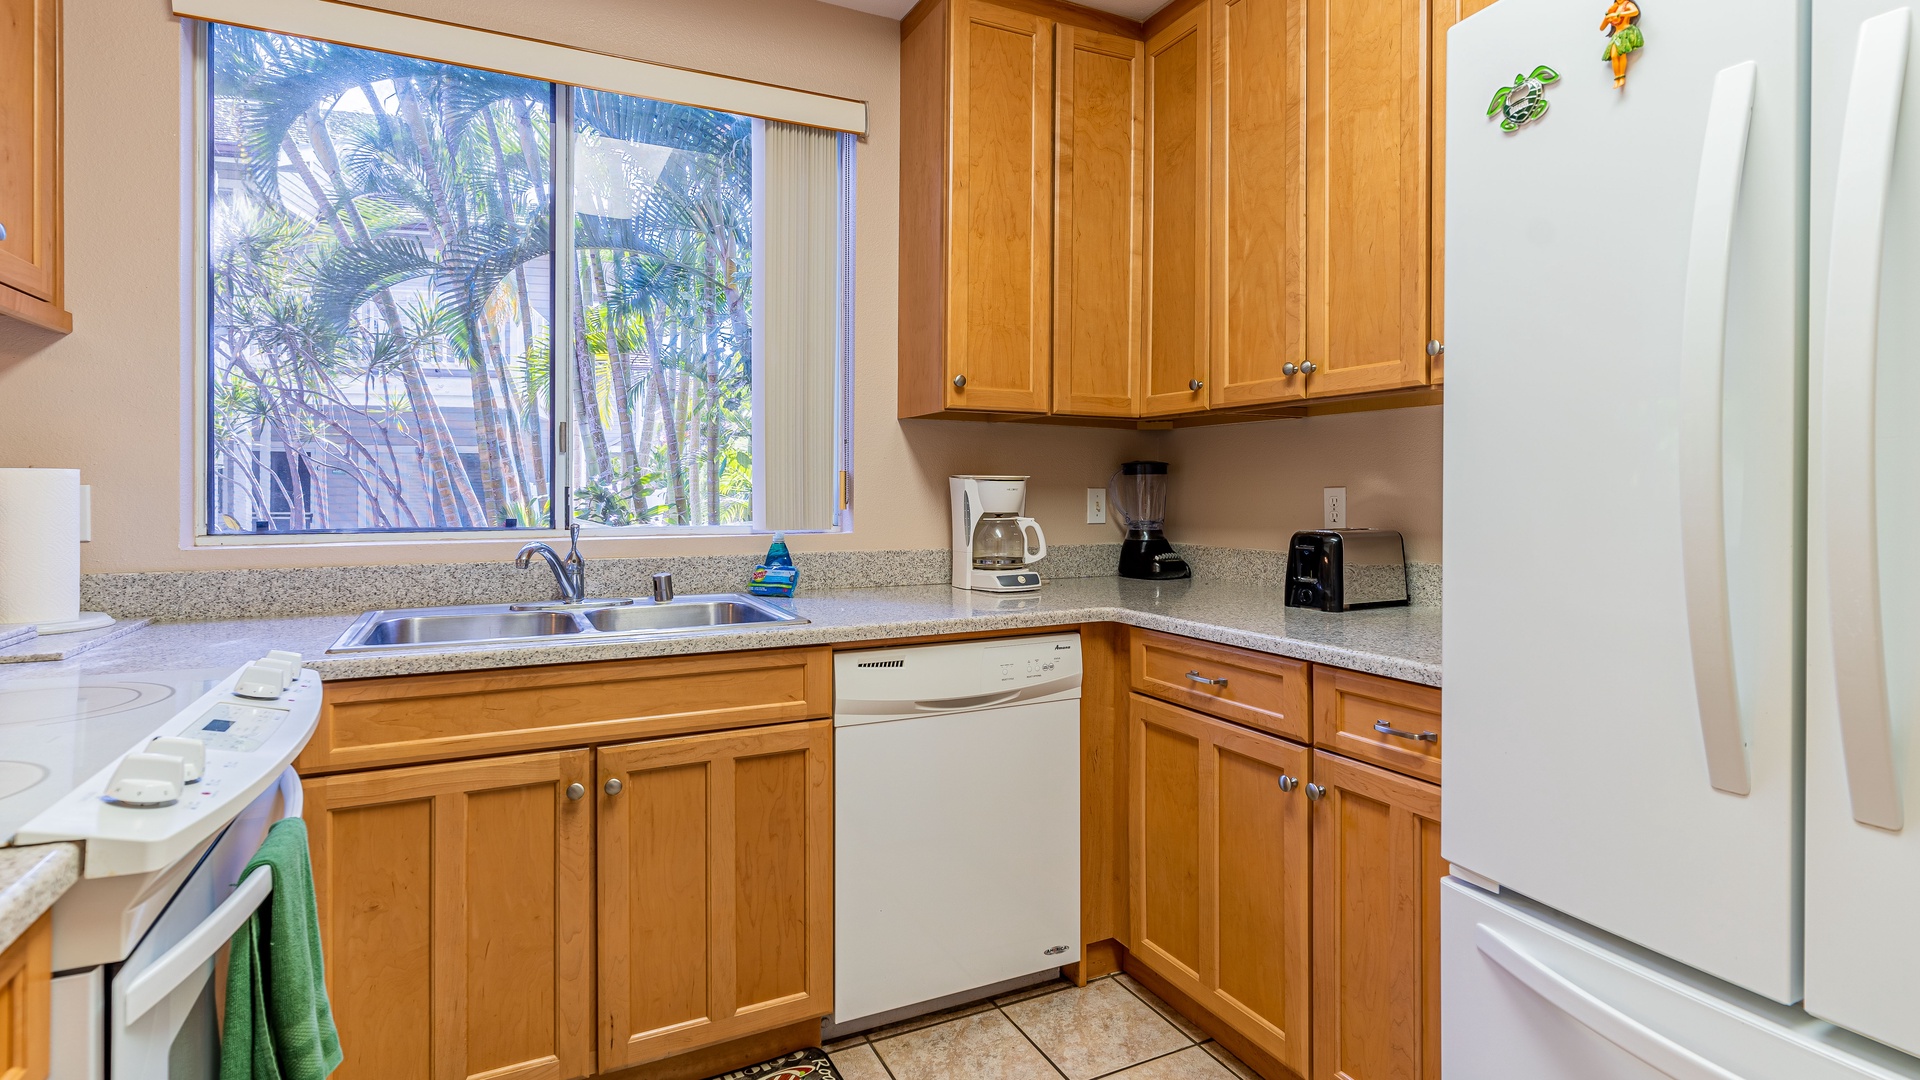 Kapolei Vacation Rentals, Fairways at Ko Olina 33F - Gracious amenities for your culinary adventures in the kitchen.